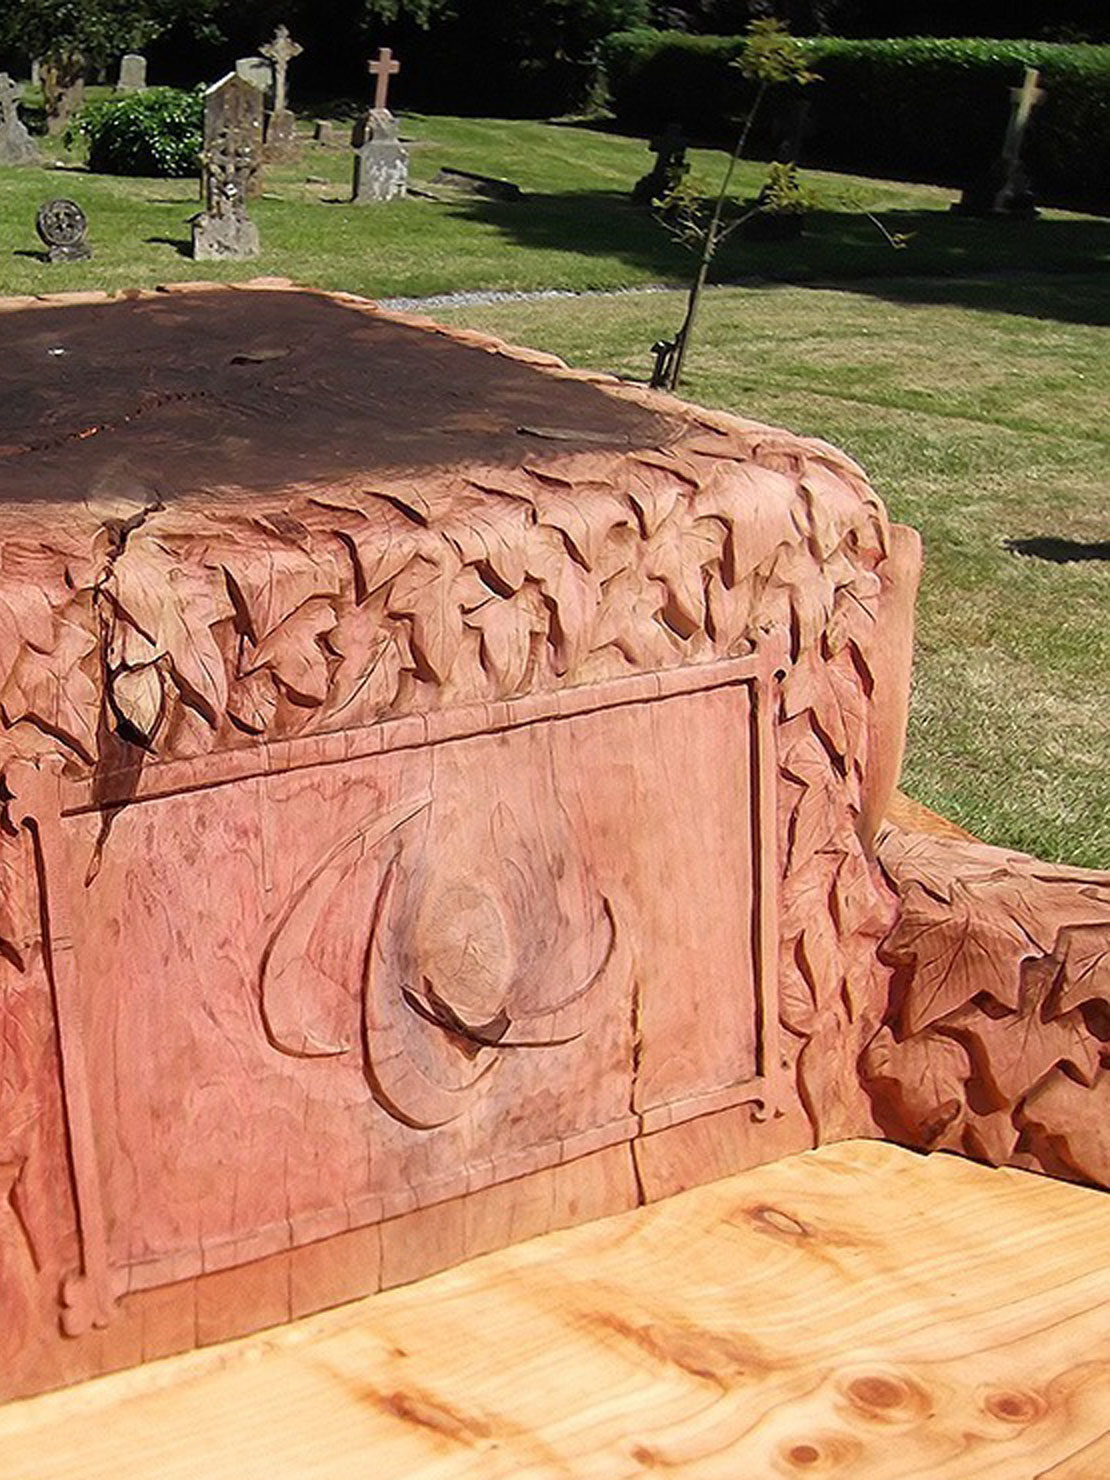 Carved wooden jubilee bench at Butleigh Church by Matthew Crabb